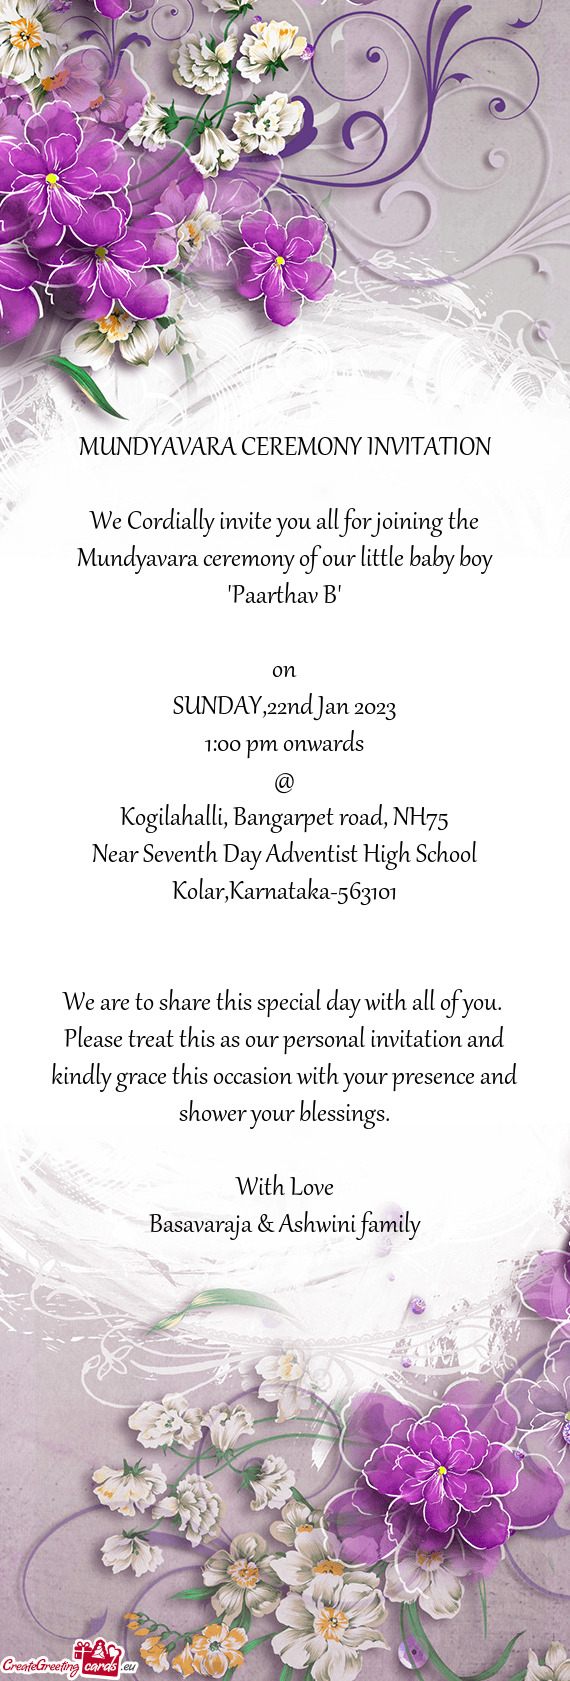 We Cordially invite you all for joining the Mundyavara ceremony of our little baby boy "Paarthav B"